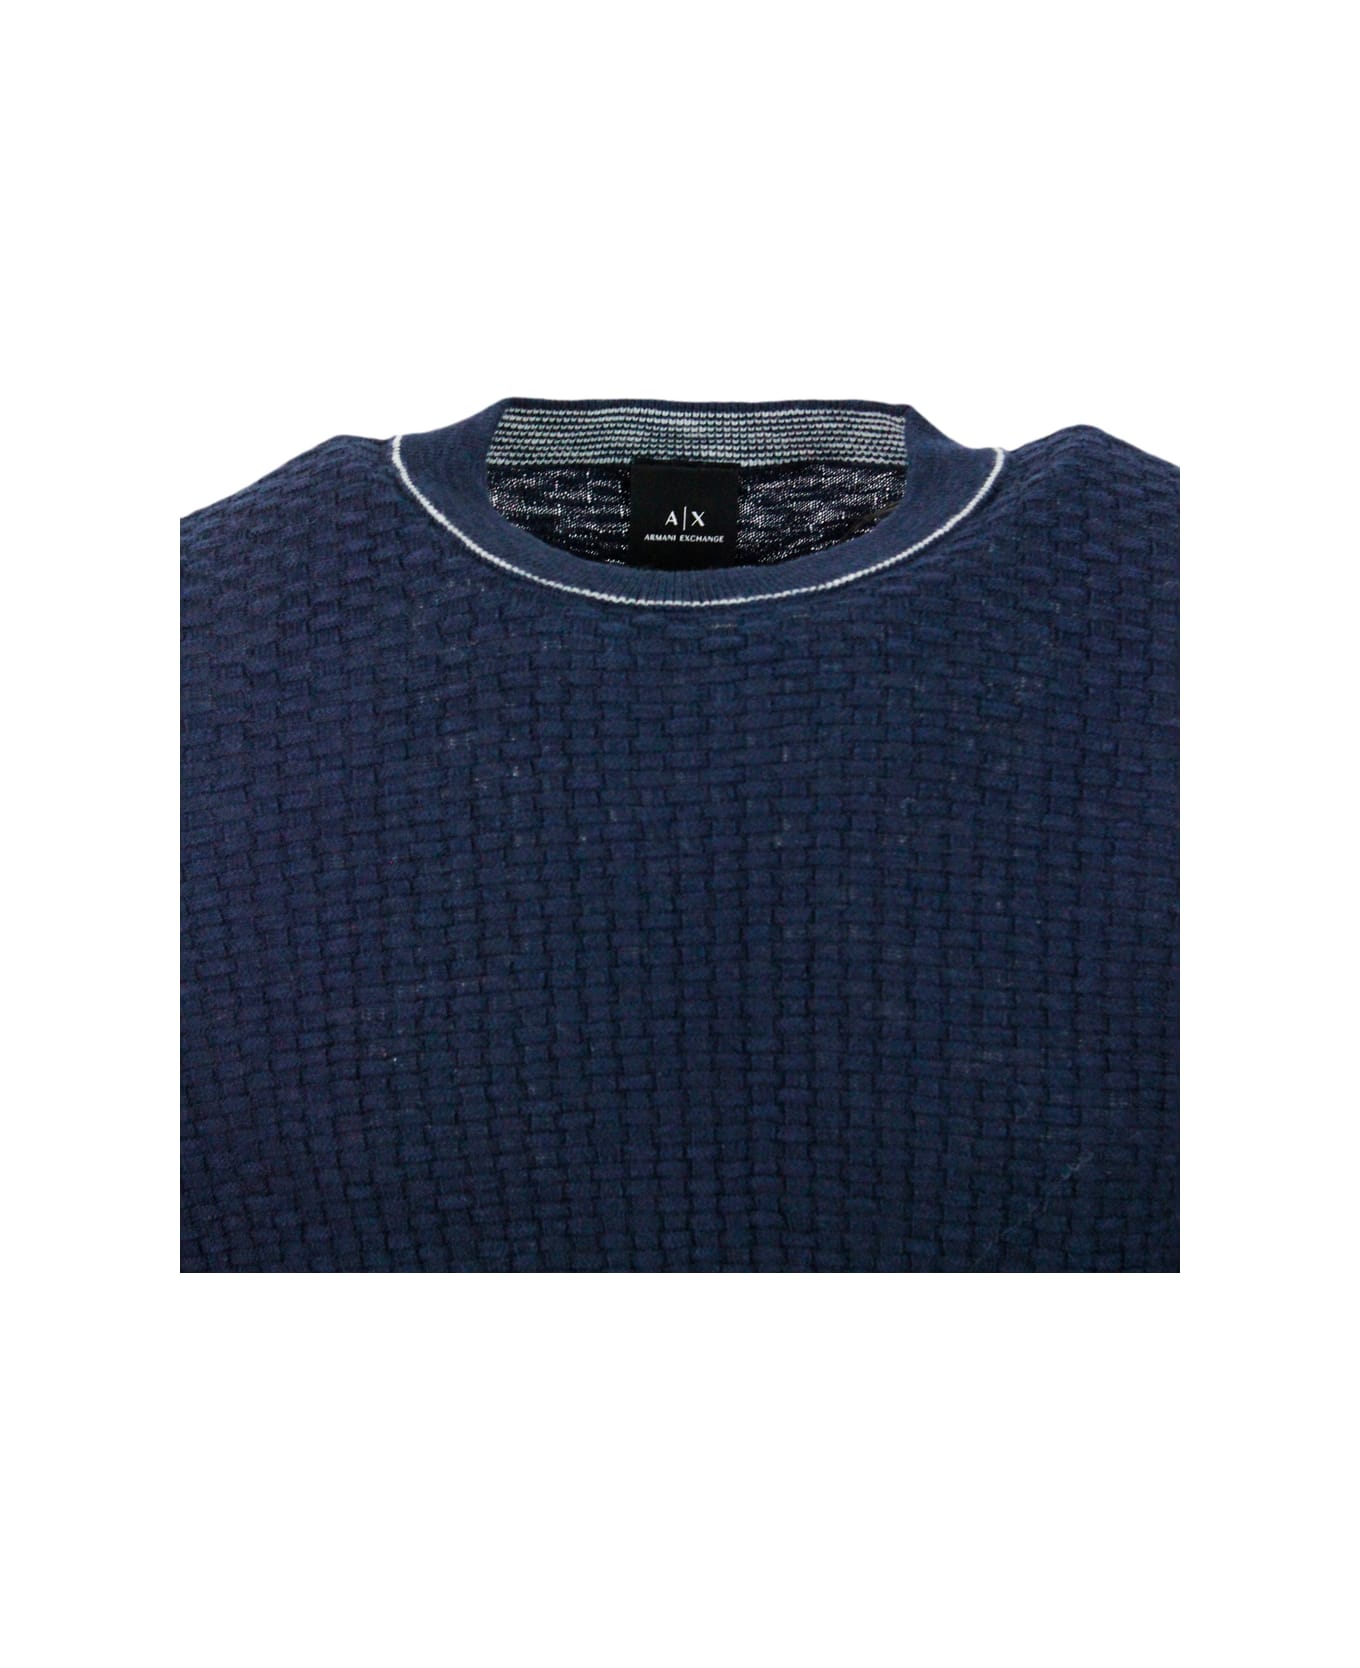 Armani Collezioni Crew-neck And Long-sleeved Sweater In Cotton And Linen With Honeycomb Workmanship. - Blu